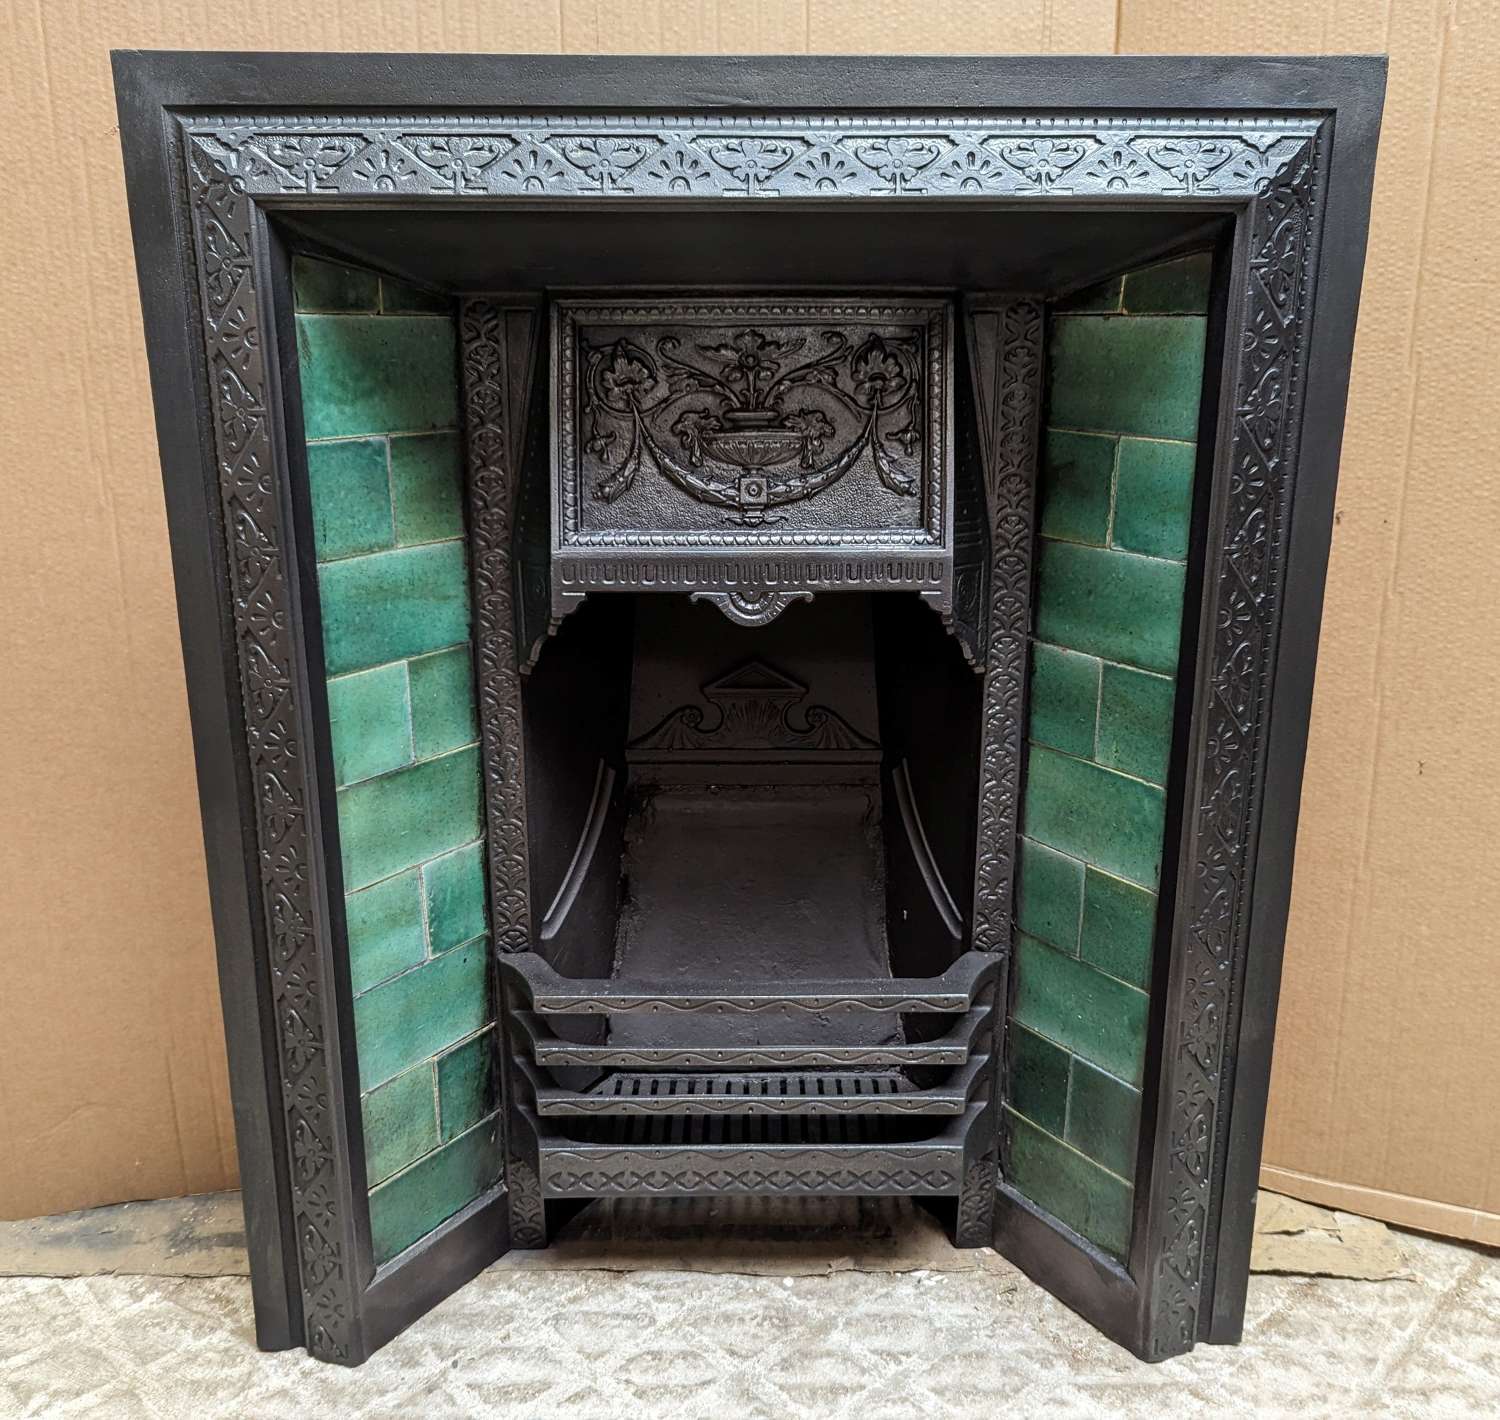 FI0086 RECLAIMED ANTIQUE CAST IRON TILED FIRE INSERT WITH GREEN TILES